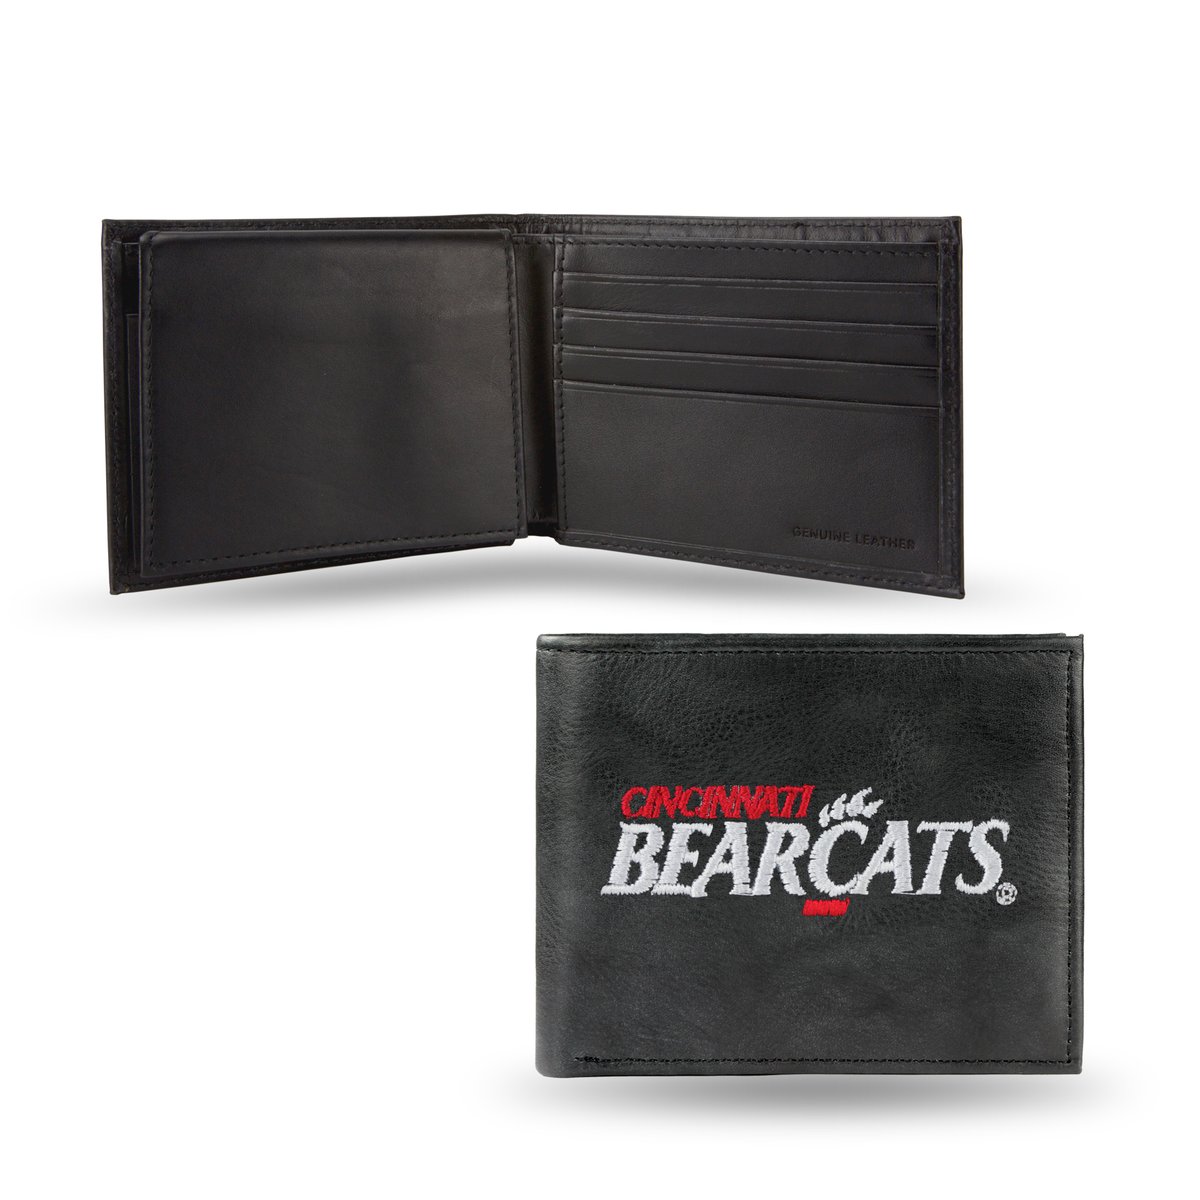 Picture of Rico Industries RBL300401 3.25 x 4.25 in. Cincinnati Bearcats Embroidered Billfold Wallet